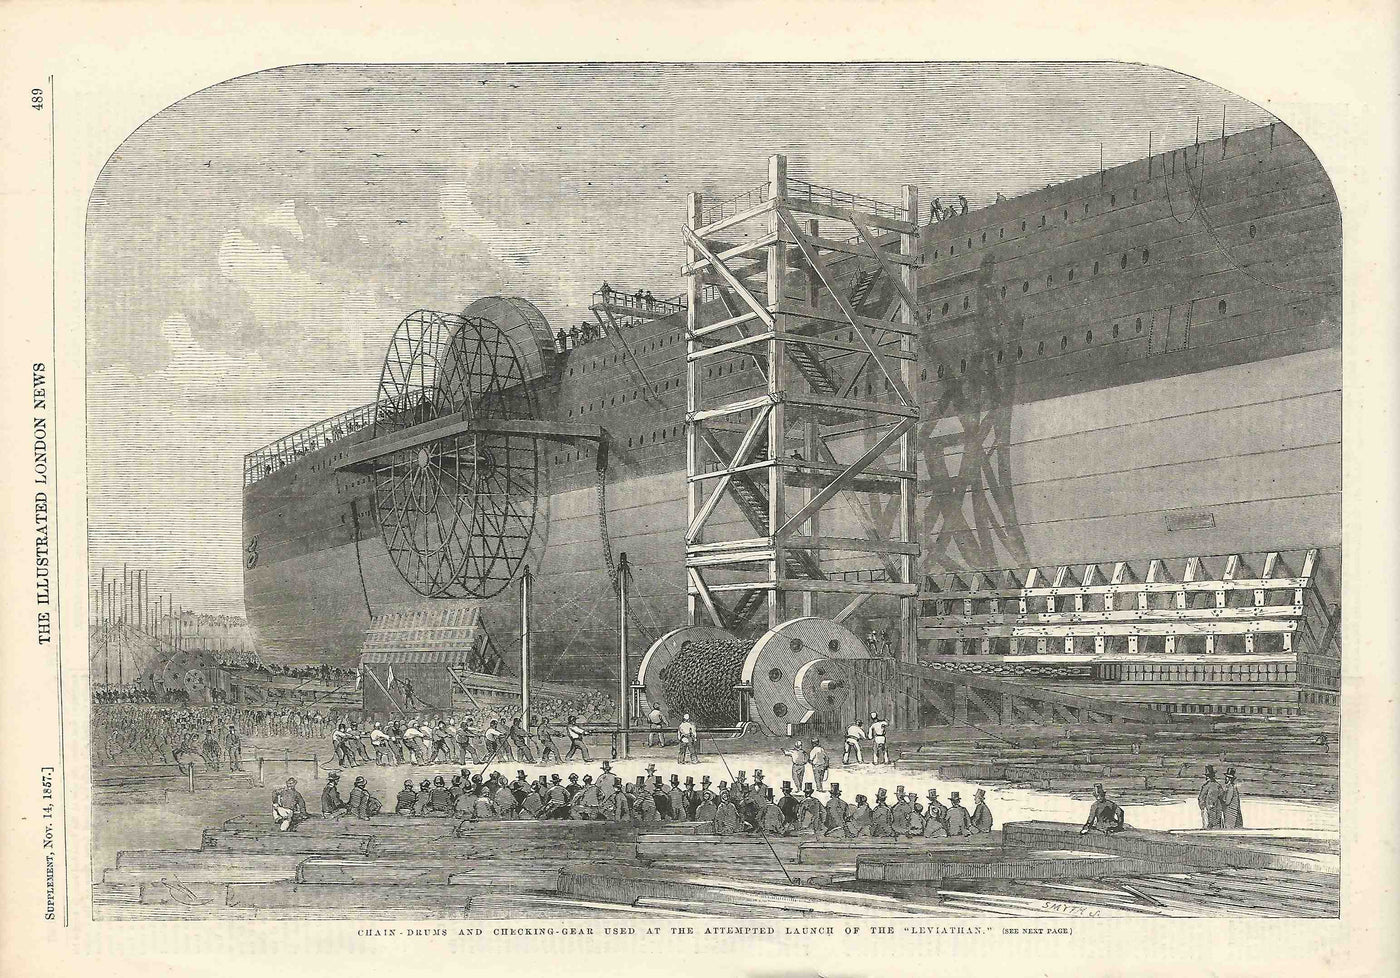 Great Eastern attempted launch Millwall, Isle of Dogs 1857